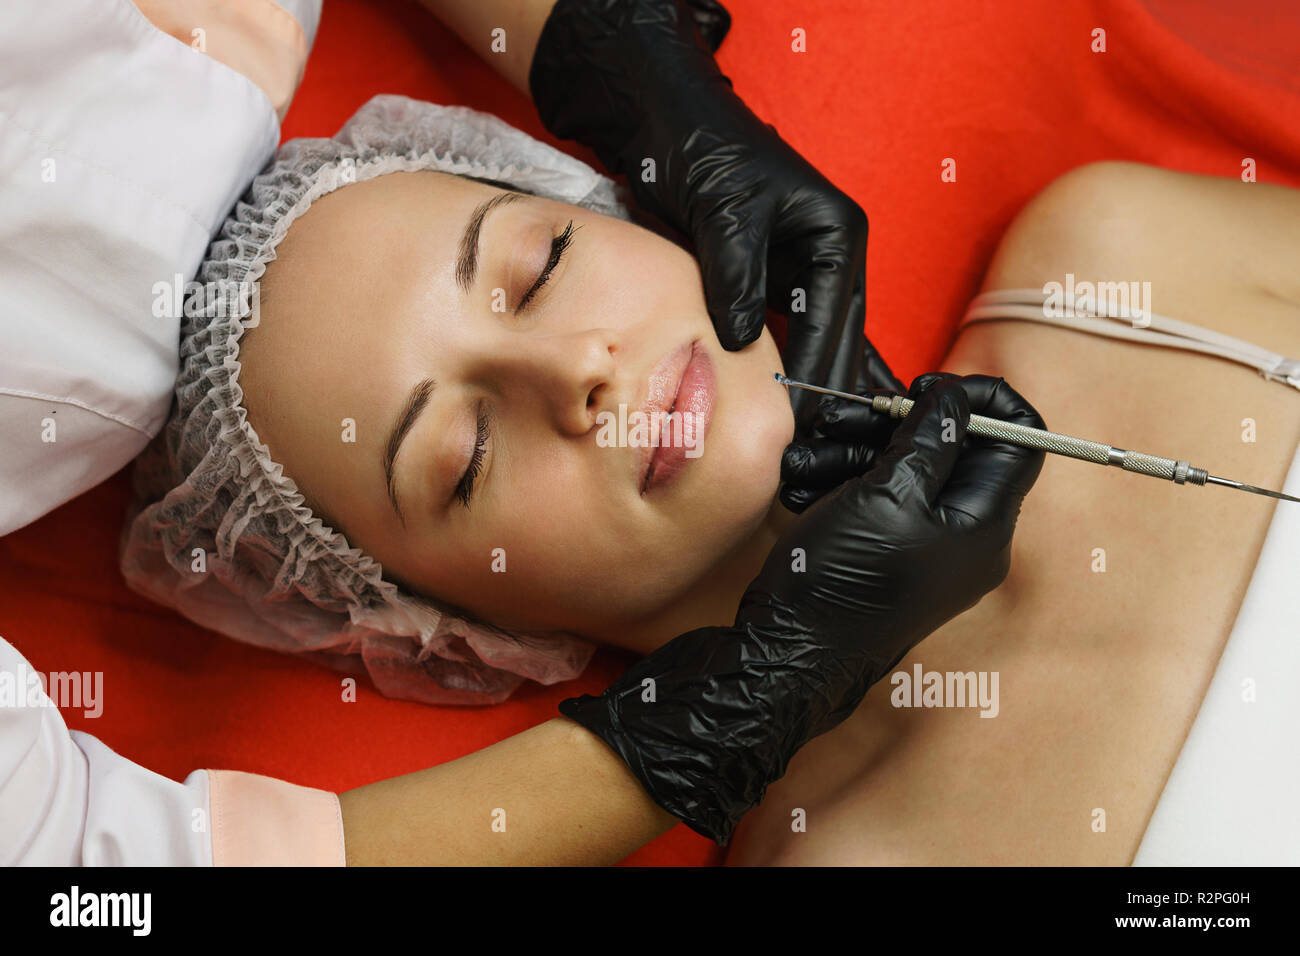 Hardware cosmetology. Beautician conducts spot cleaning of face of young woman. Removal of acne and cleansing of skin pores. Anti-aging treatments. Stock Photo